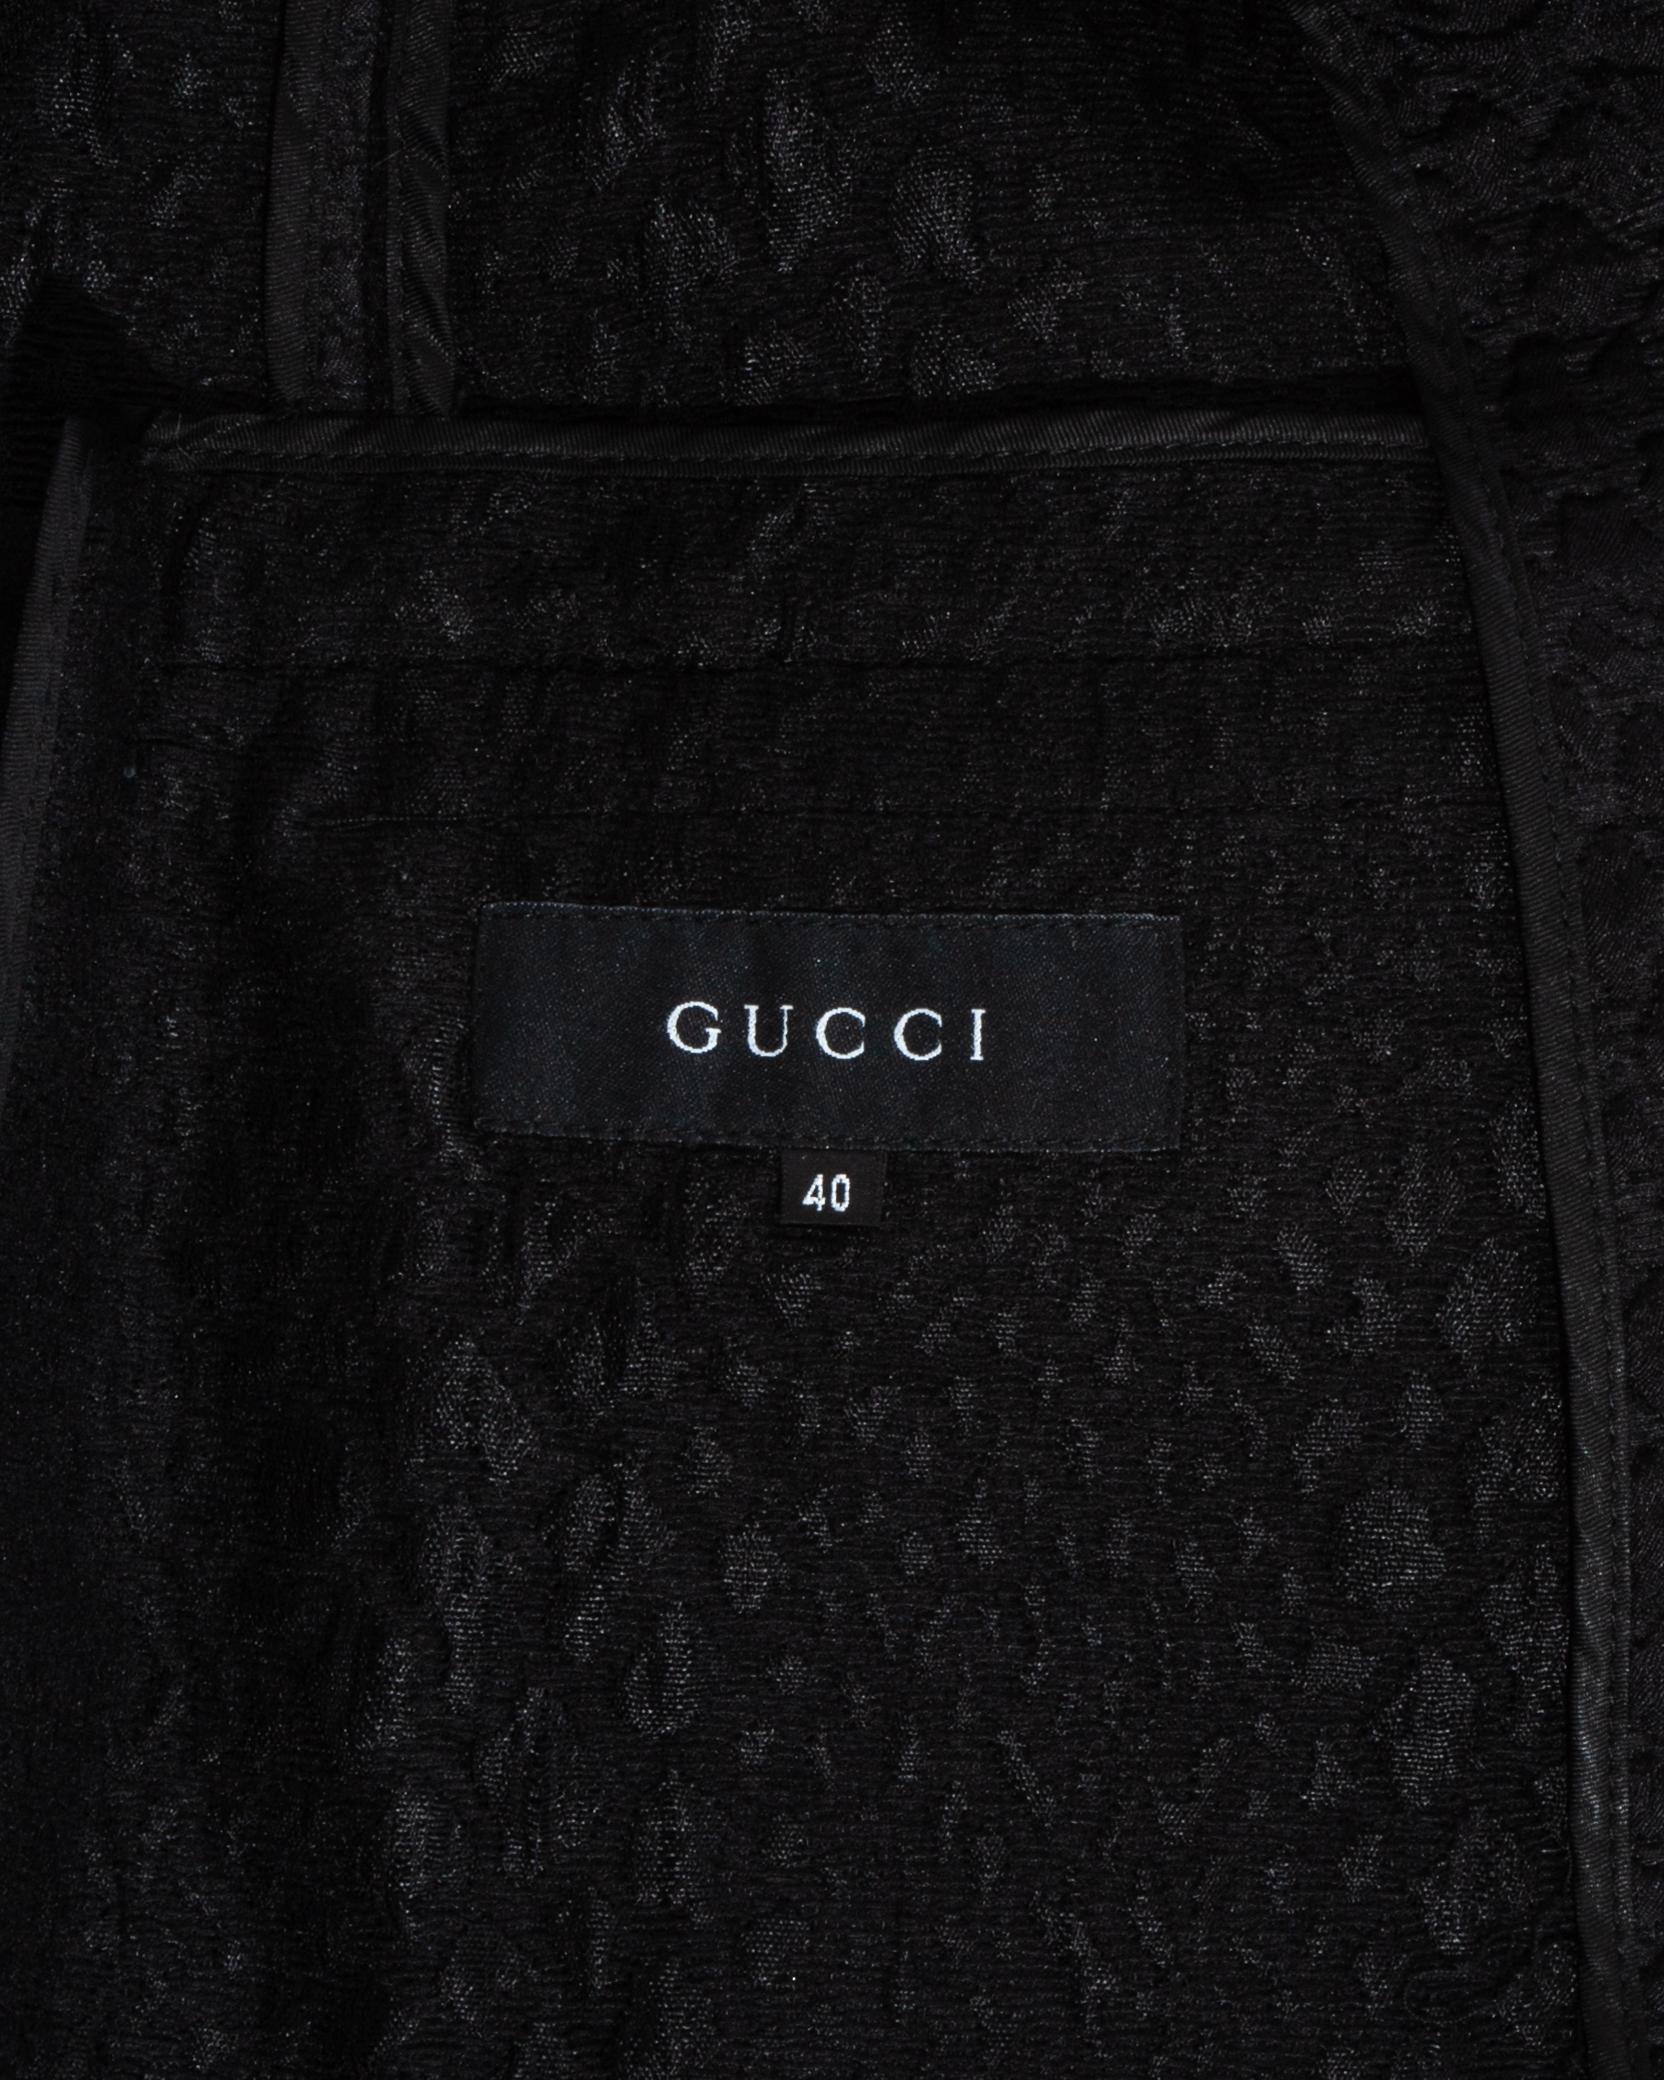 Gucci by Tom Ford black croc embossed evening pant suit, ss 2000 For Sale 1